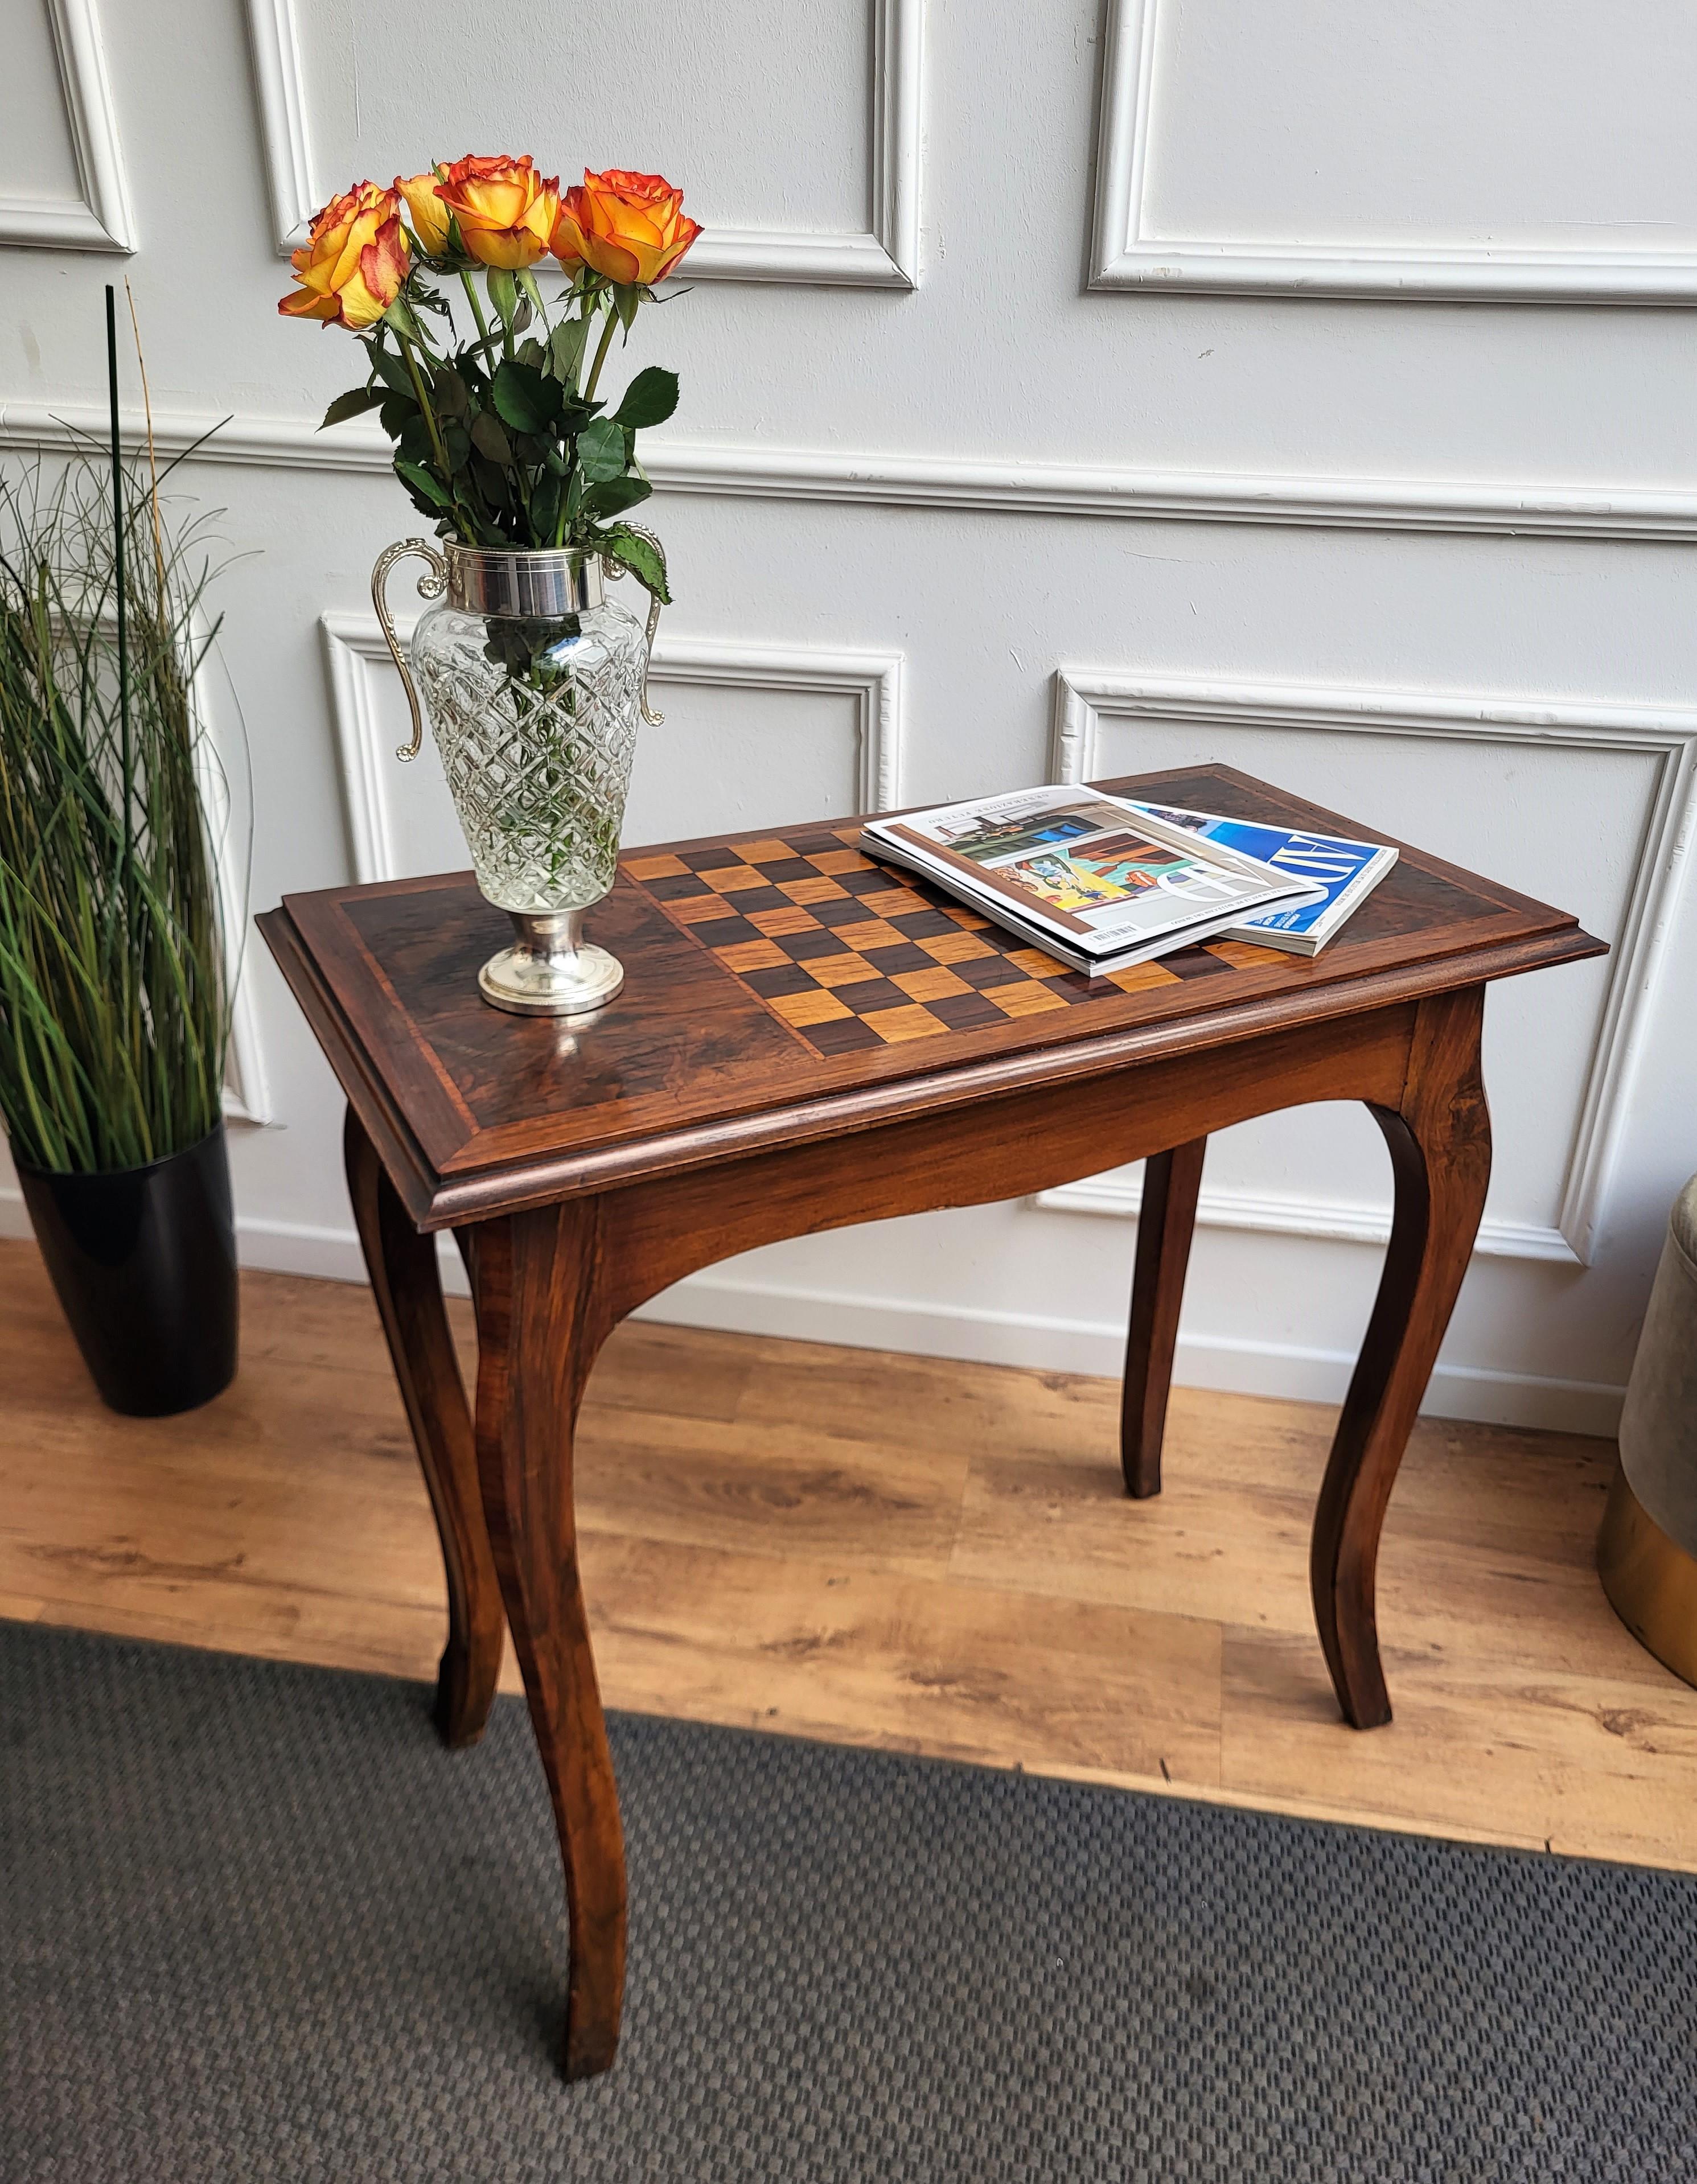 Beautiful antique Italian solid walnut games side table with inlay chess game, central drawers and beveled edges over four beautiful walnut cabriole legs with inlay decorated wood and brass finals. This Italian walnut side table with the rich and